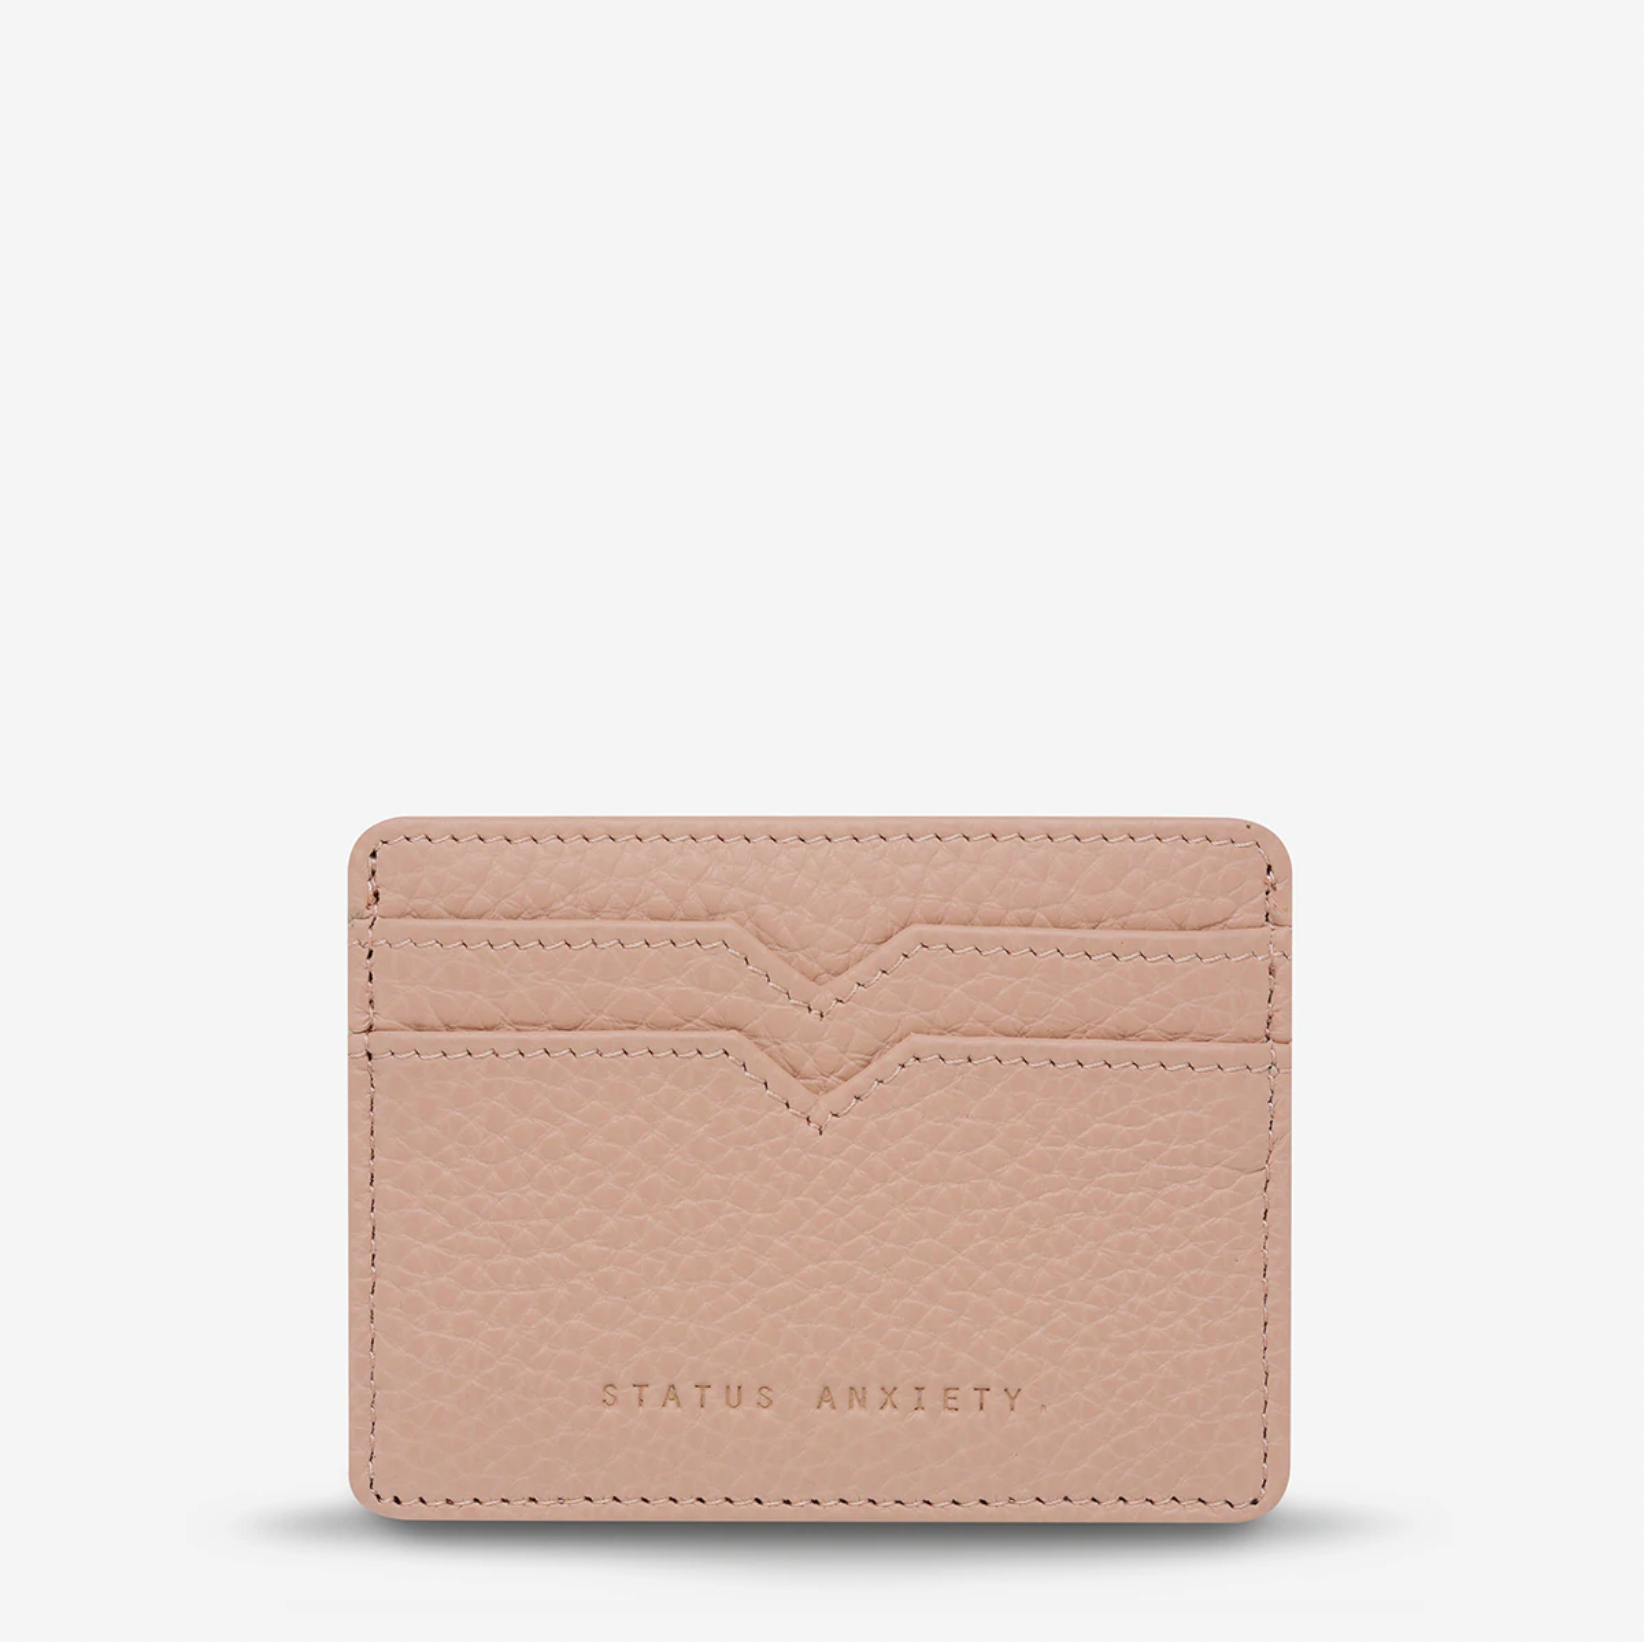 Status Anxiety Together For Now Wallet in Dusty Pink